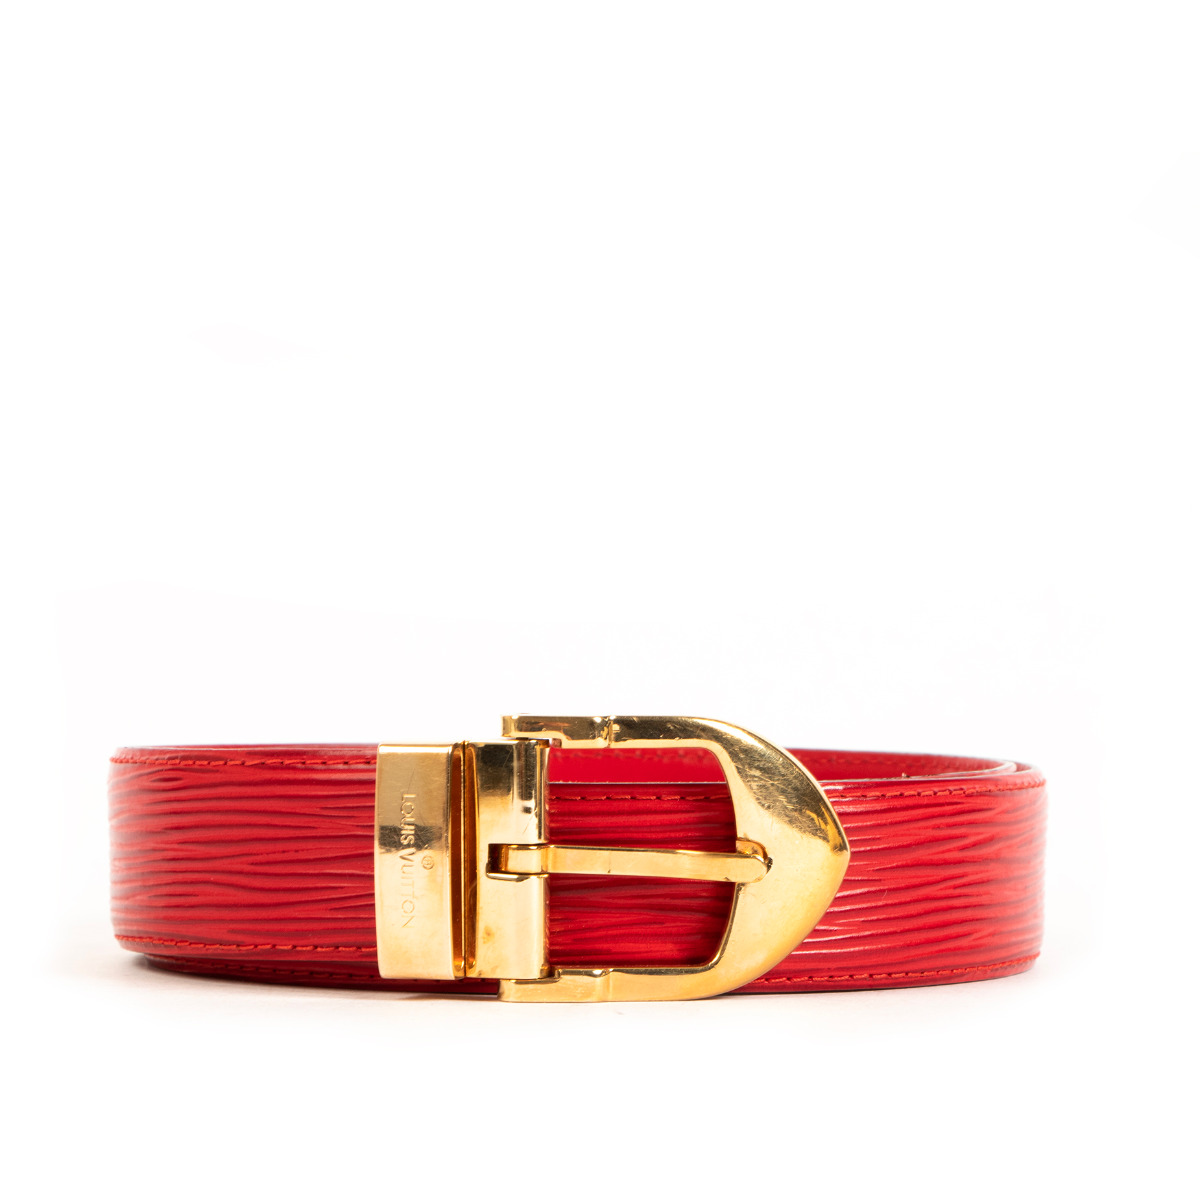 Louis Vuitton - Authenticated Belt - Leather Red for Women, Never Worn